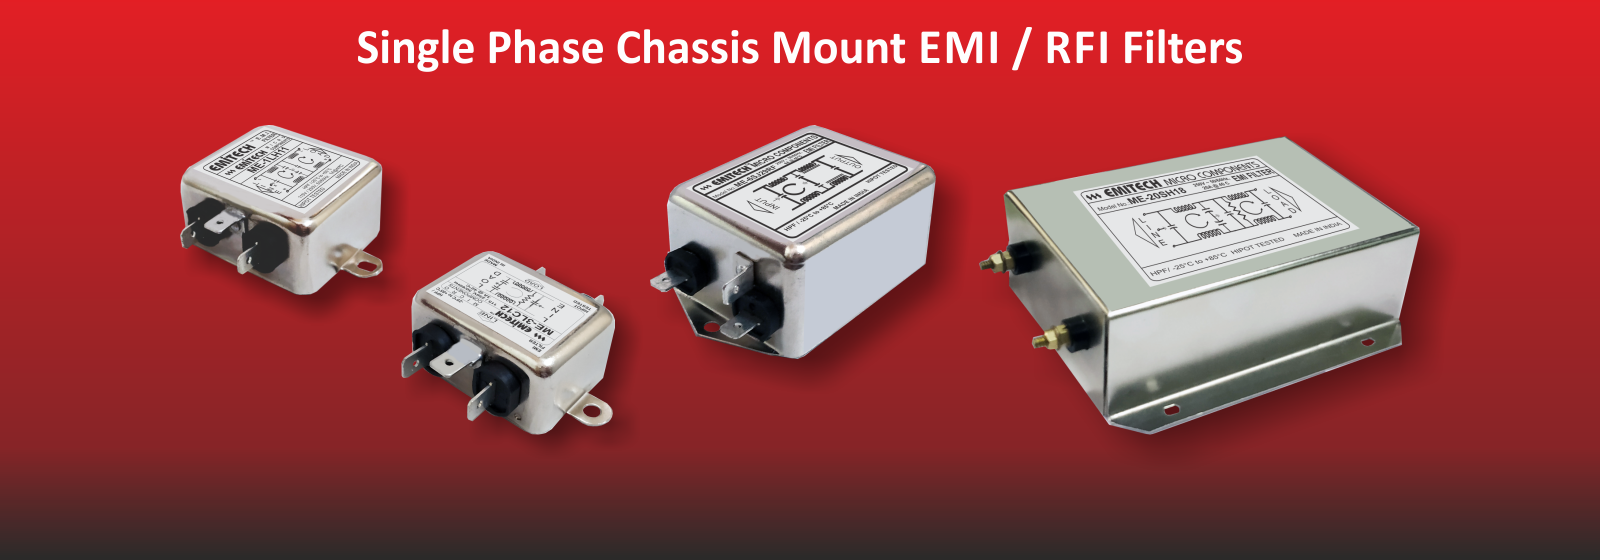 Single Phase Chassis Mount EMI Filter